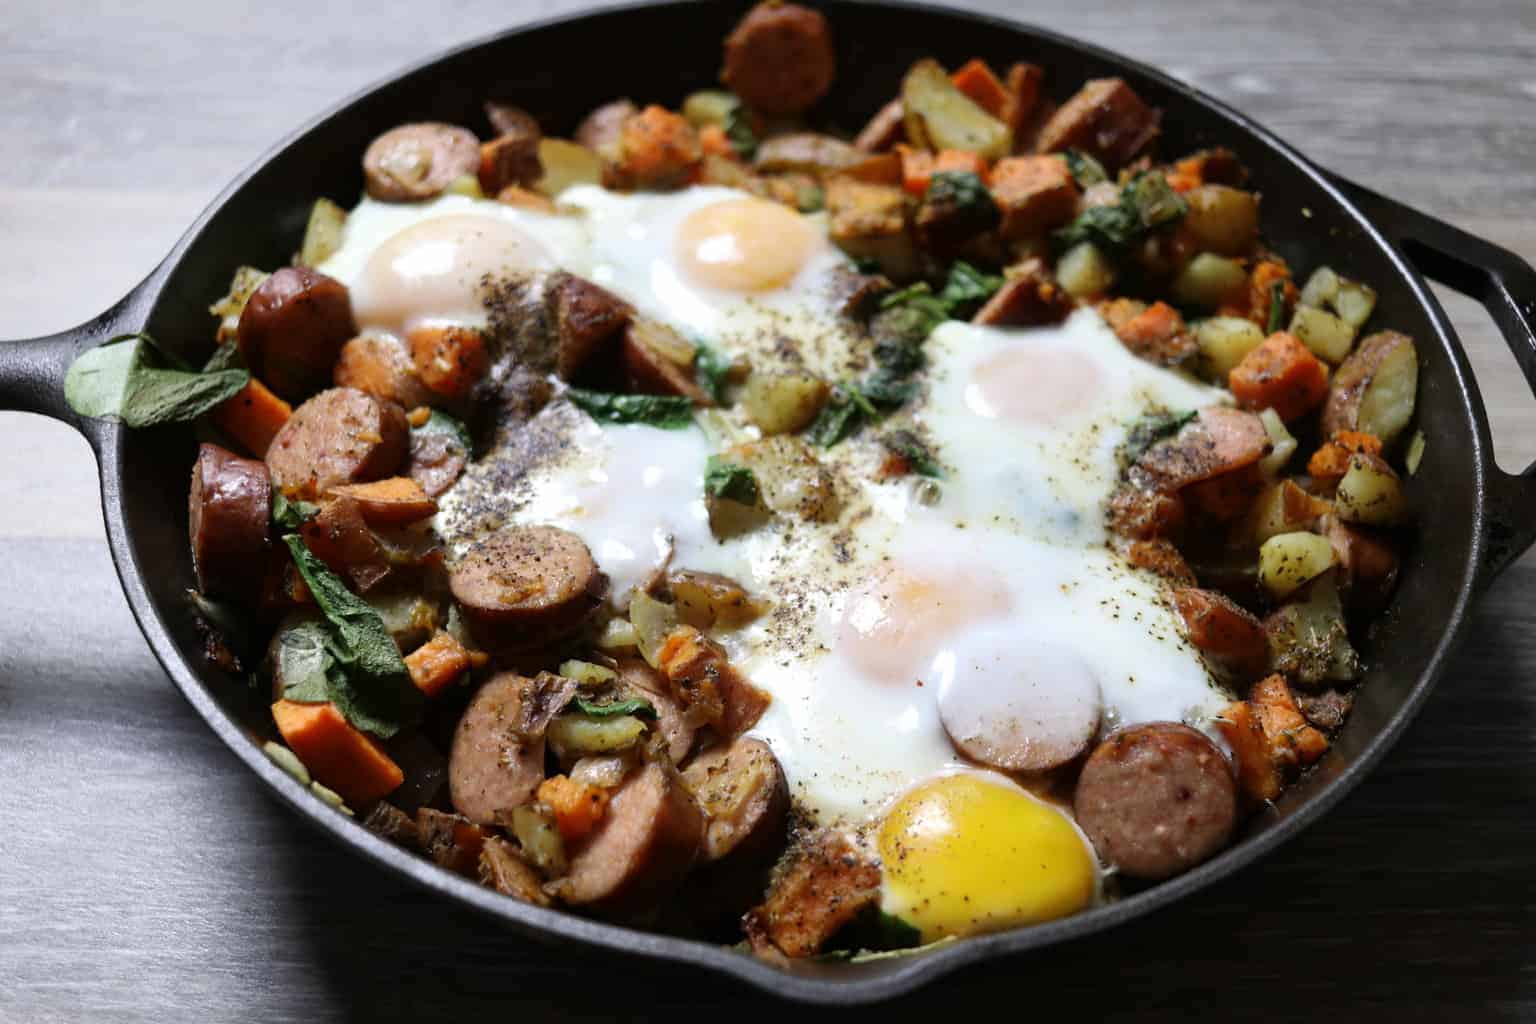 Sausage, sweet potatoes, egg hash in cast iron skillet.